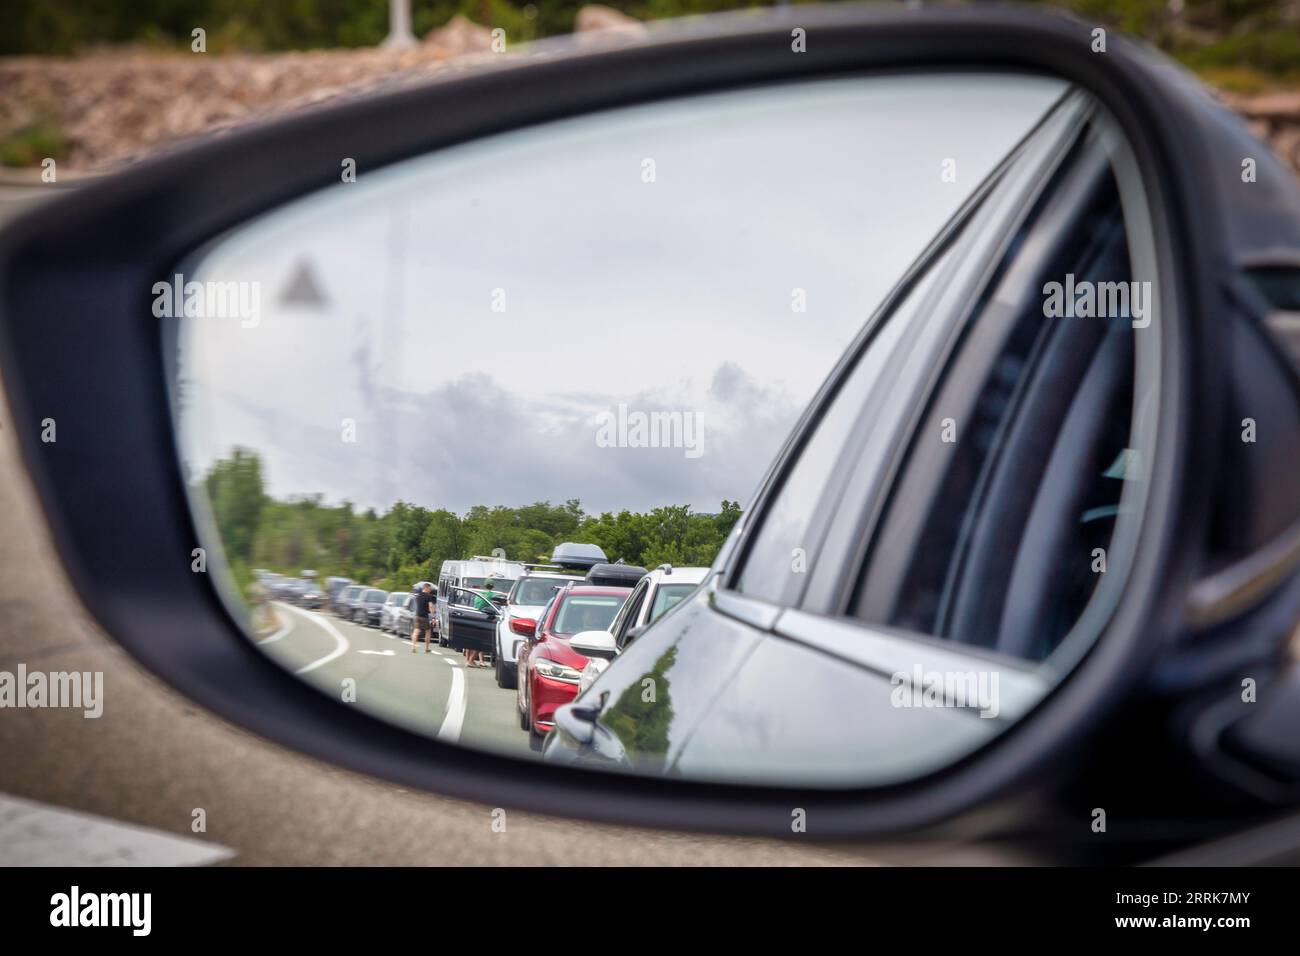 Croatia, Lika-Senj County, municipality of Senj, port of Stinica, cars in queue waiting for the ferry seen from the outside rear view mirror of the car Stock Photo